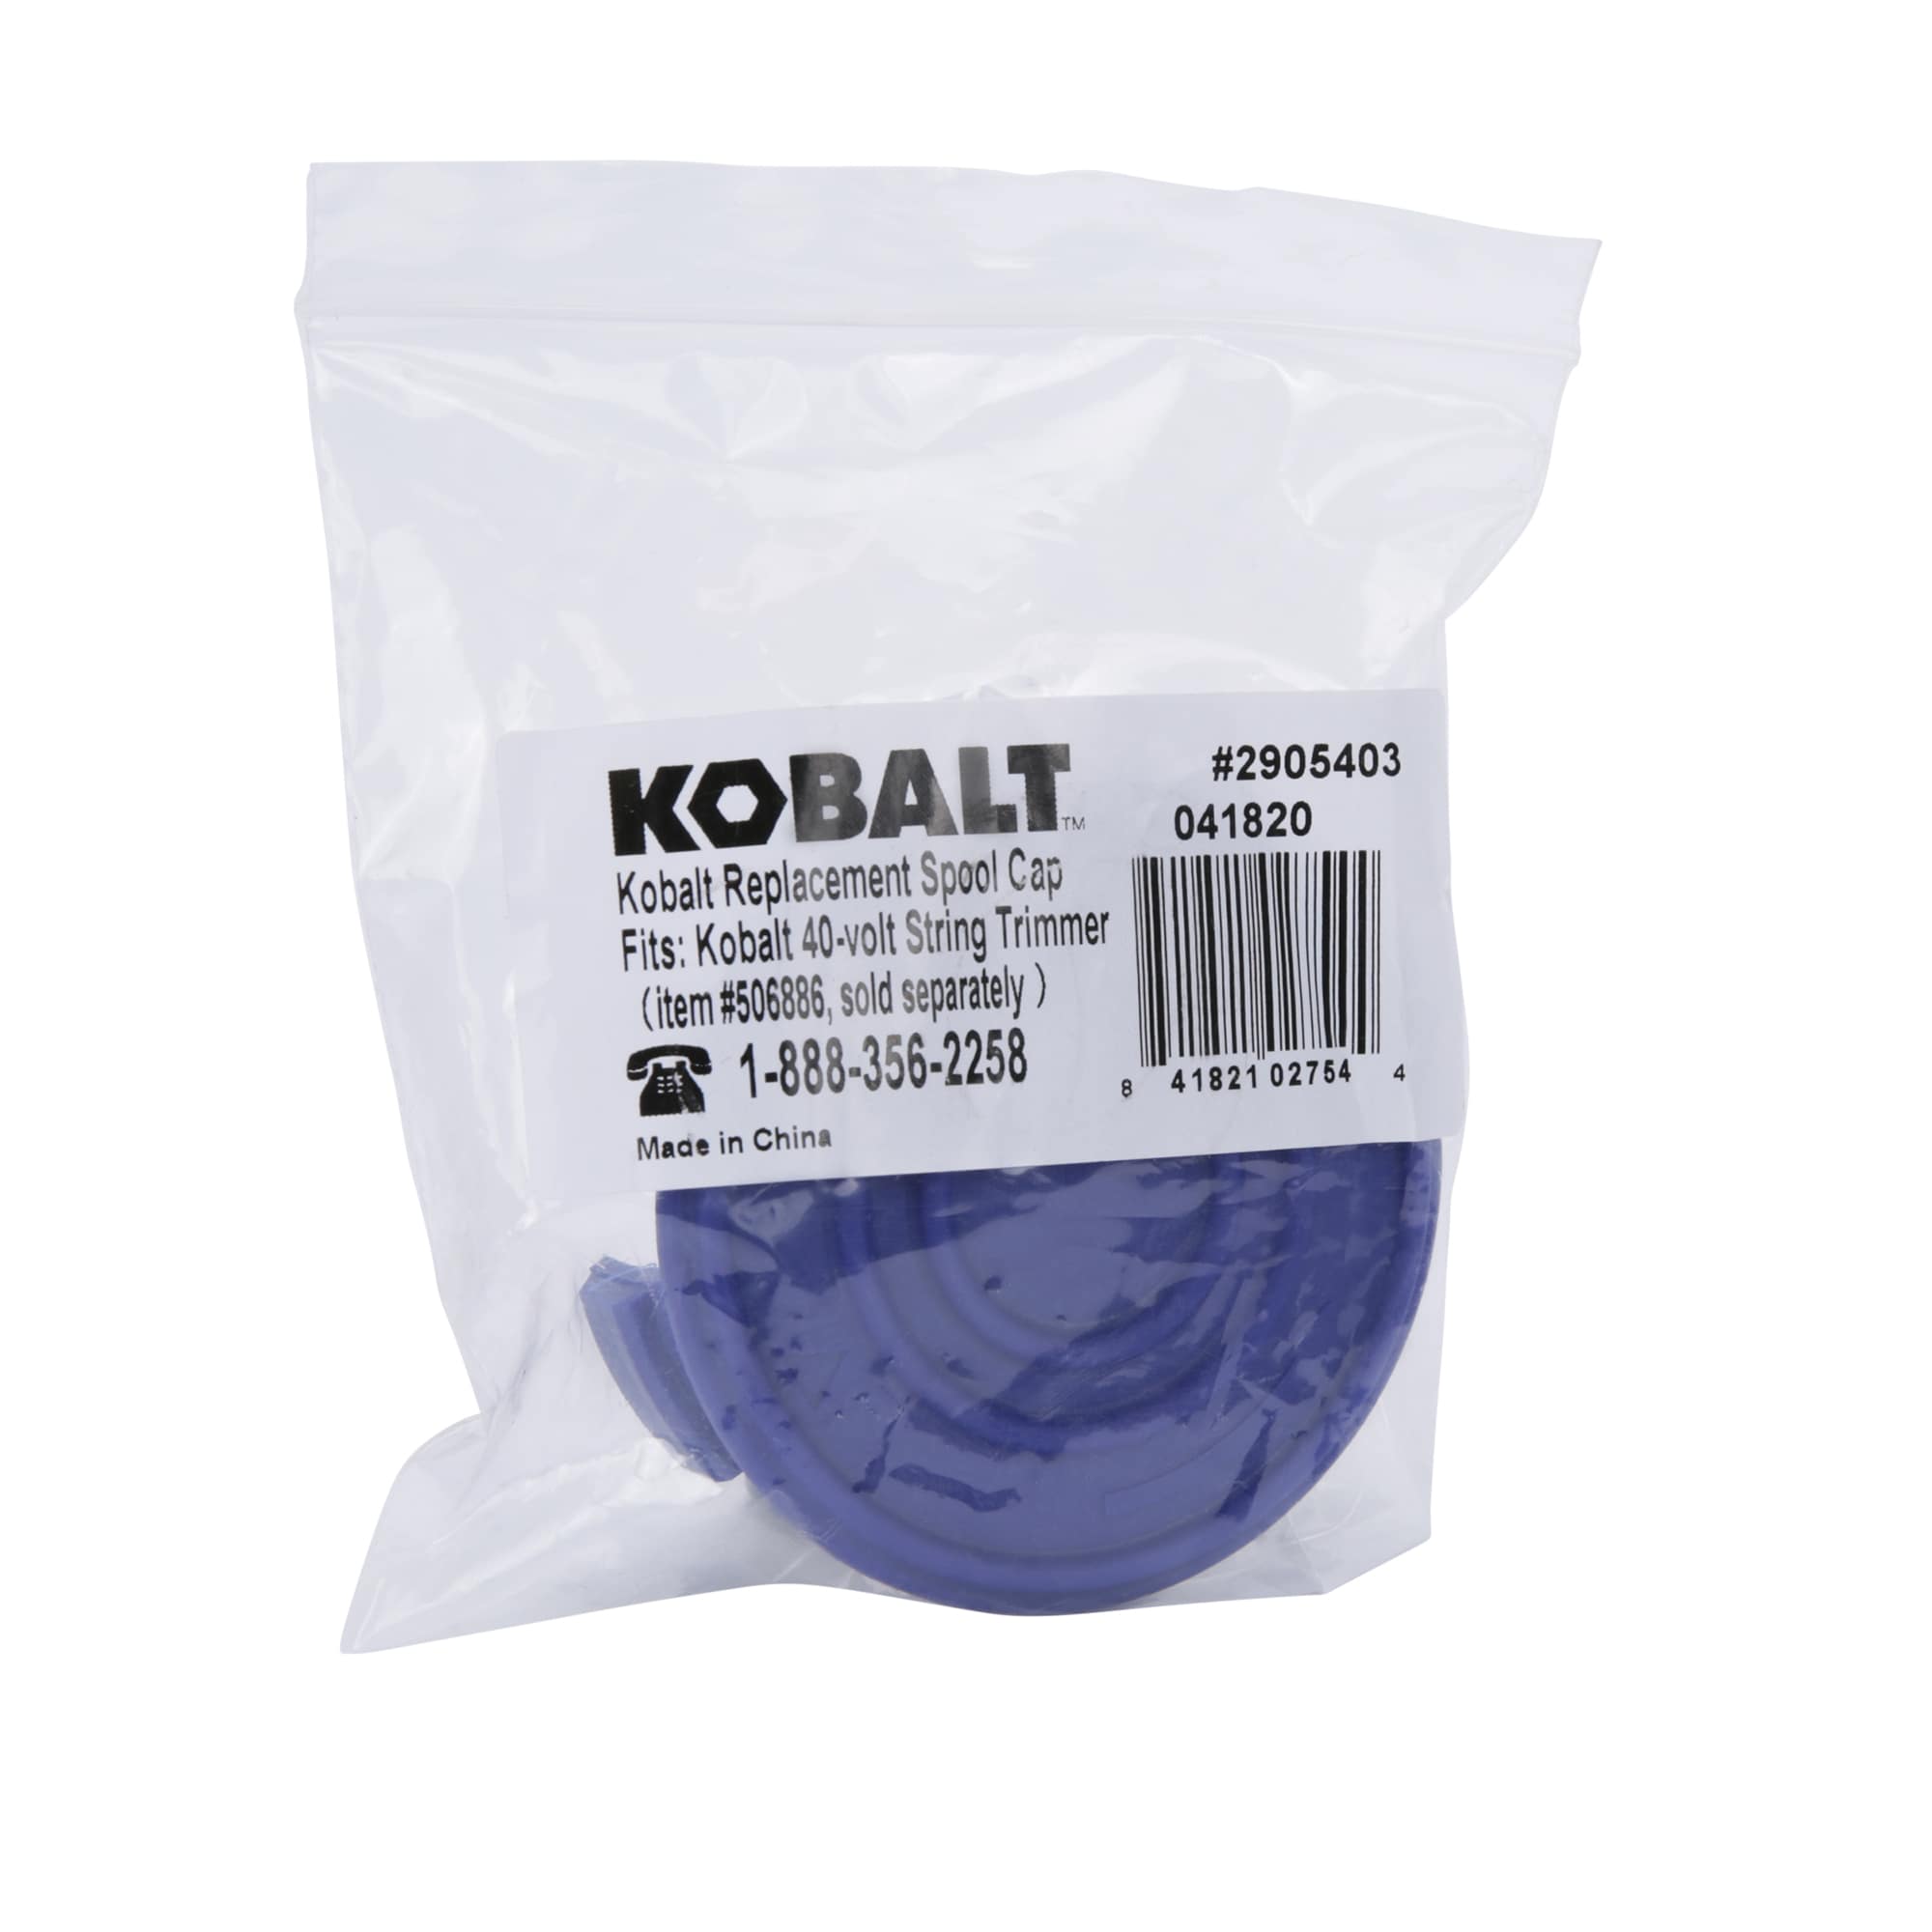 Kobalt 29053031 6ft Trimmer Line Replacement Spool for sale online